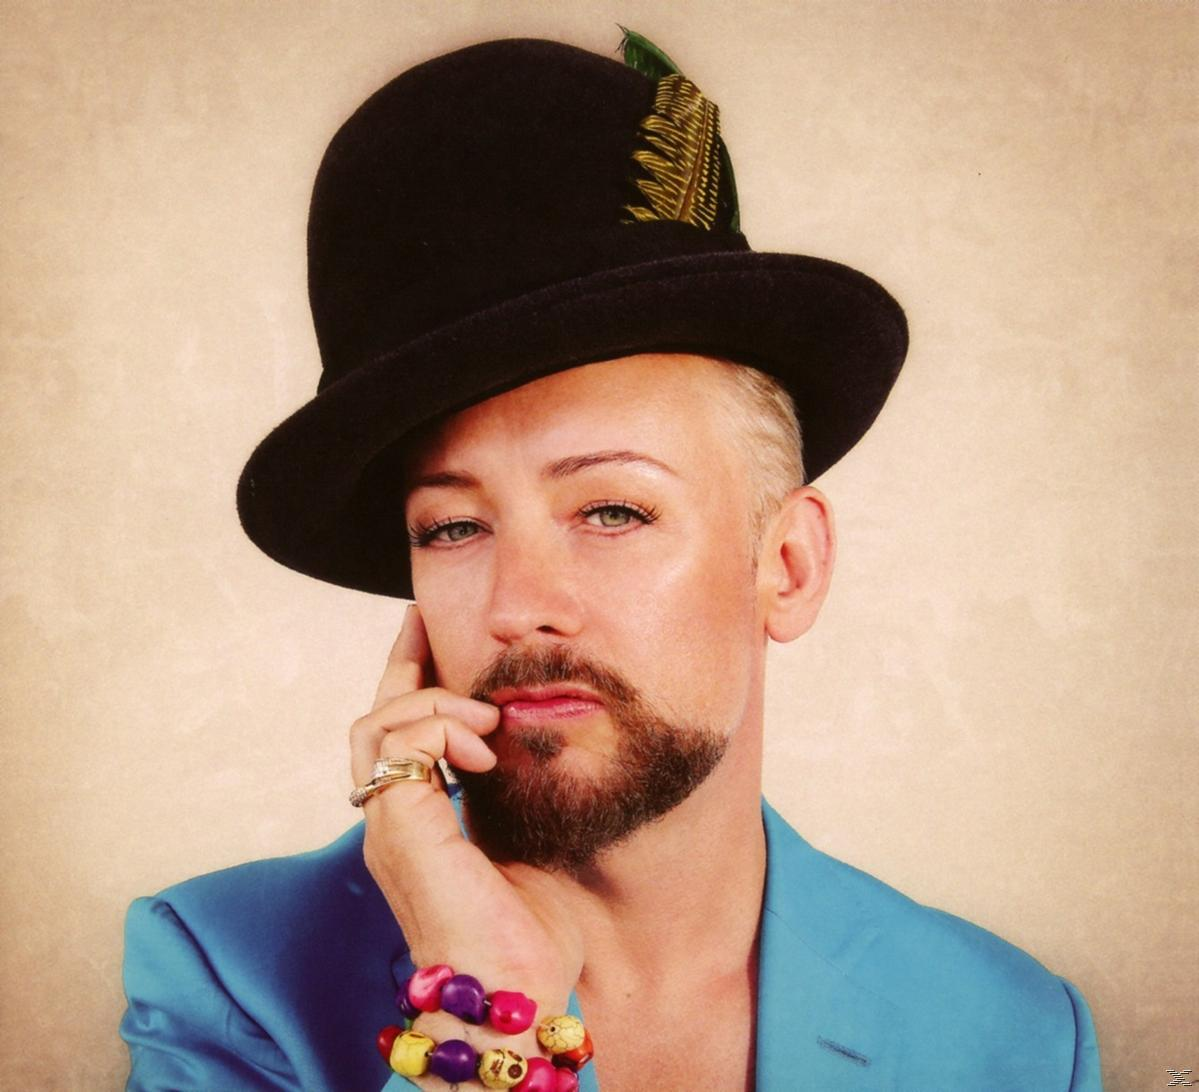 Boy George - This I Do (CD) - What Is